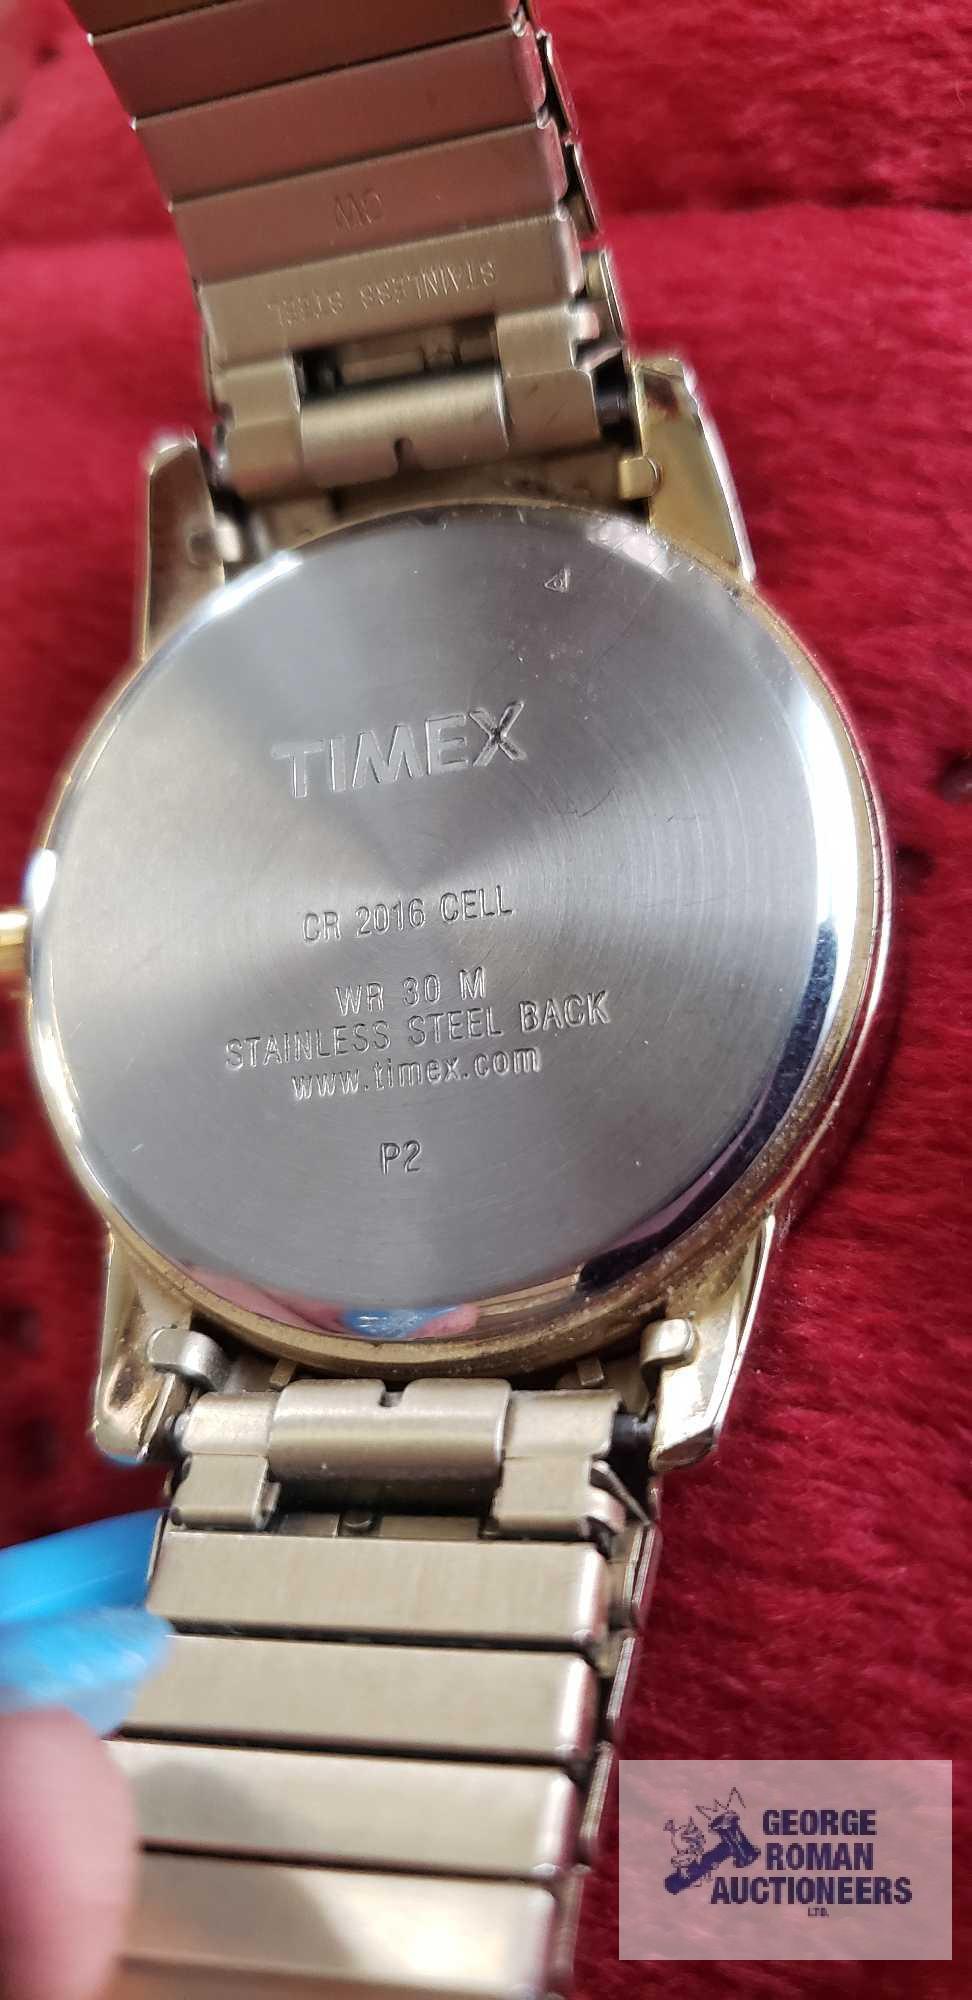 Timex Indiglo...and Timex Expedition watches